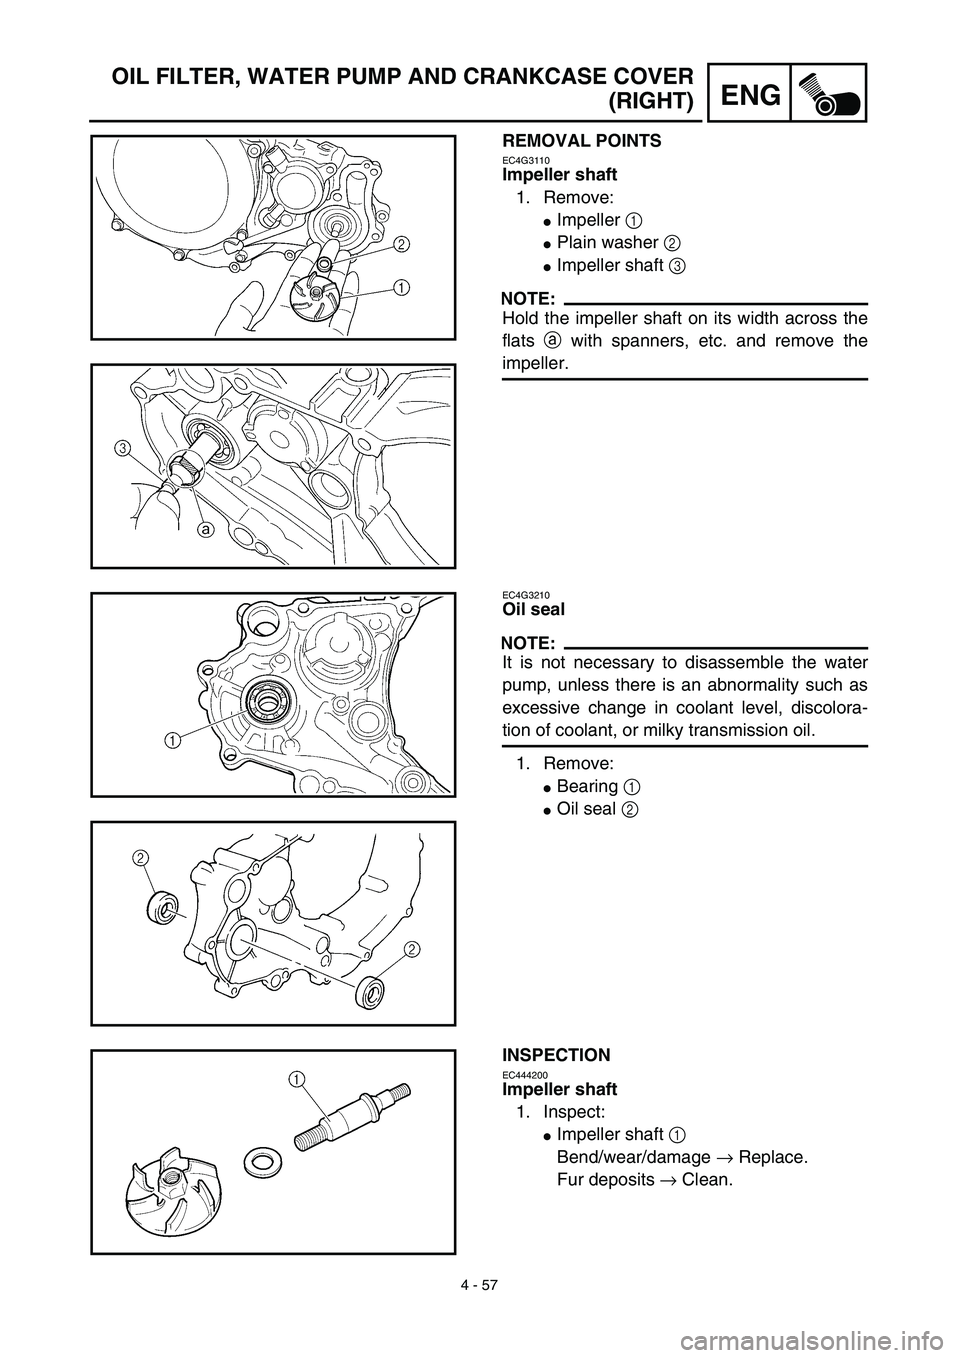 YAMAHA YZ450F 2003  Owners Manual 4 - 57
ENG
OIL FILTER, WATER PUMP AND CRANKCASE COVER
(RIGHT)
REMOVAL POINTS
EC4G3110
Impeller shaft
1. Remove:
Impeller 1 
Plain washer 2 
Impeller shaft 3 
NOTE:
Hold the impeller shaft on its wi